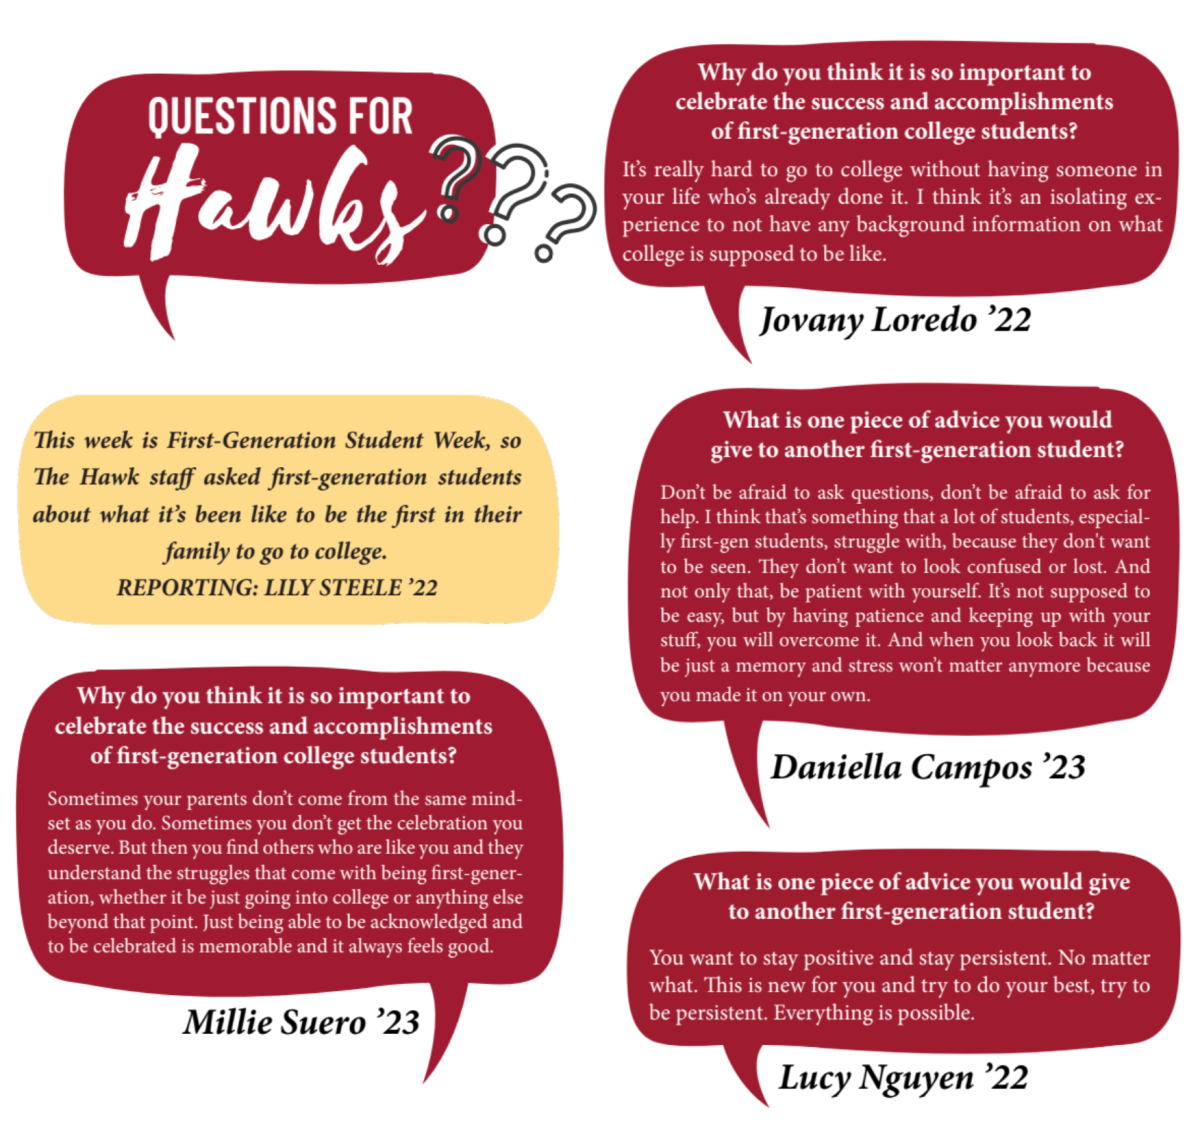 Questions+for+Hawks%3A+First+generation+students